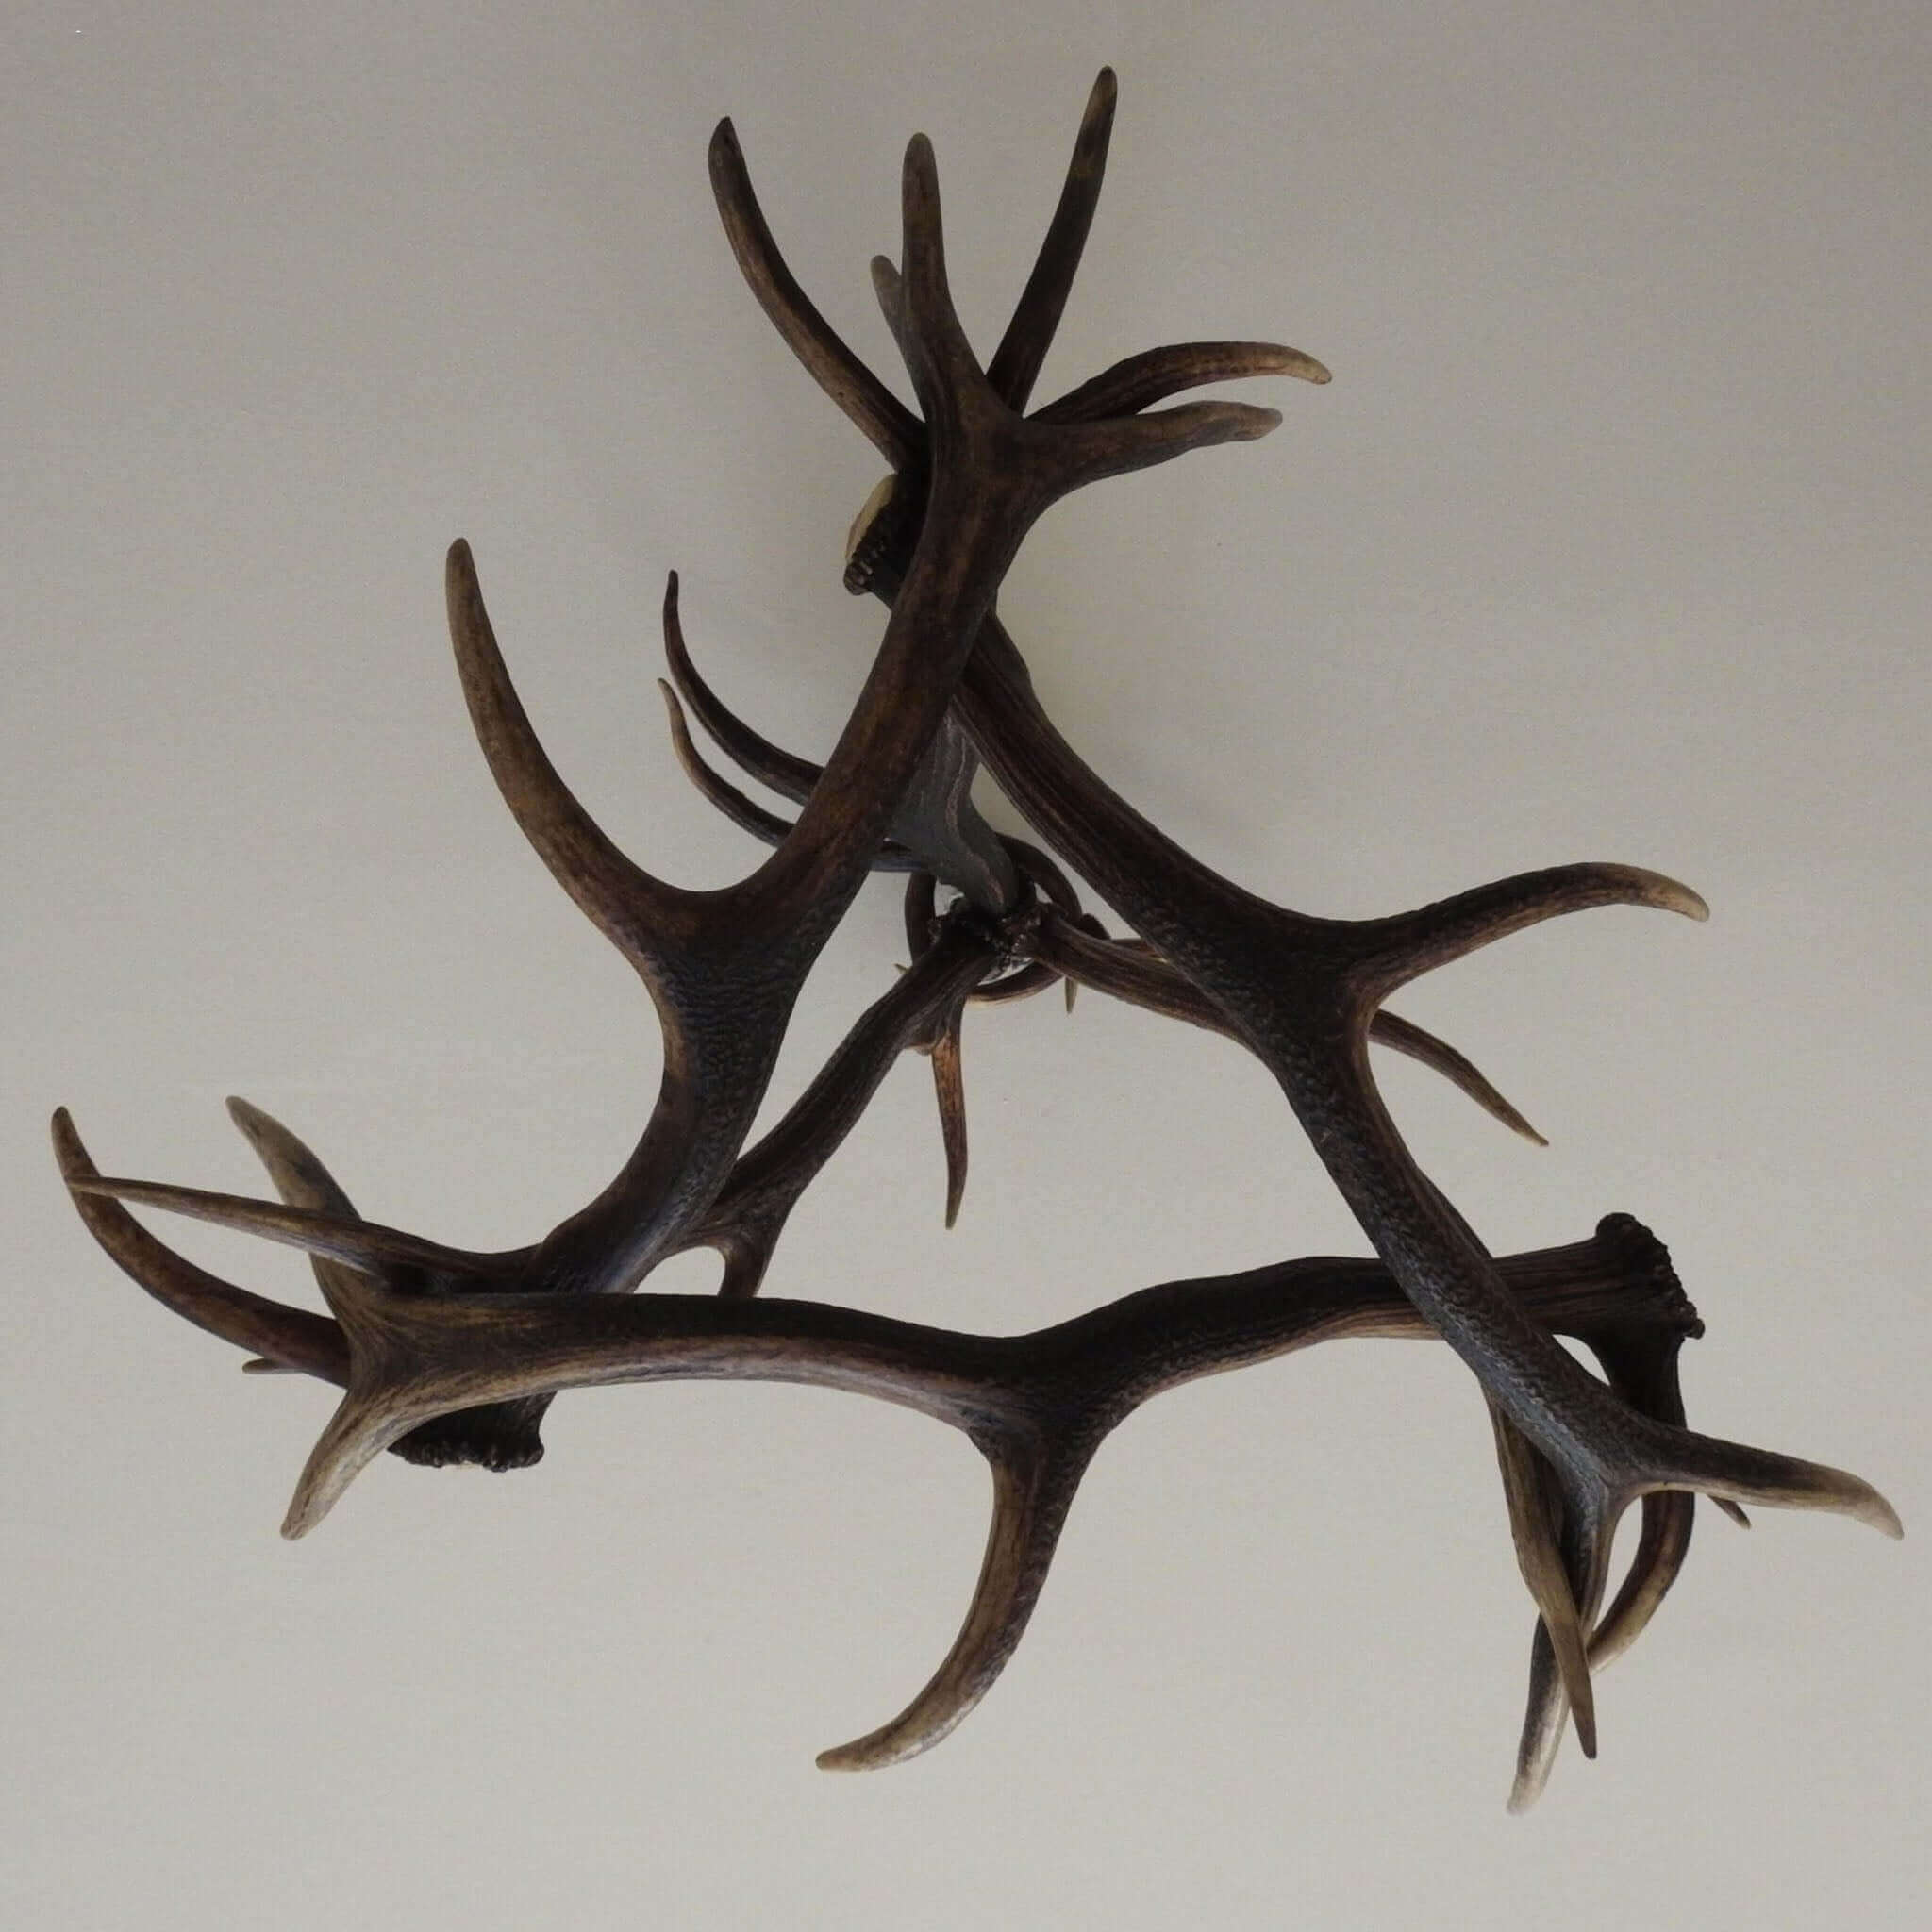 Triangle shape, real antler chandelier made of red deer antlers. View from the bottom.